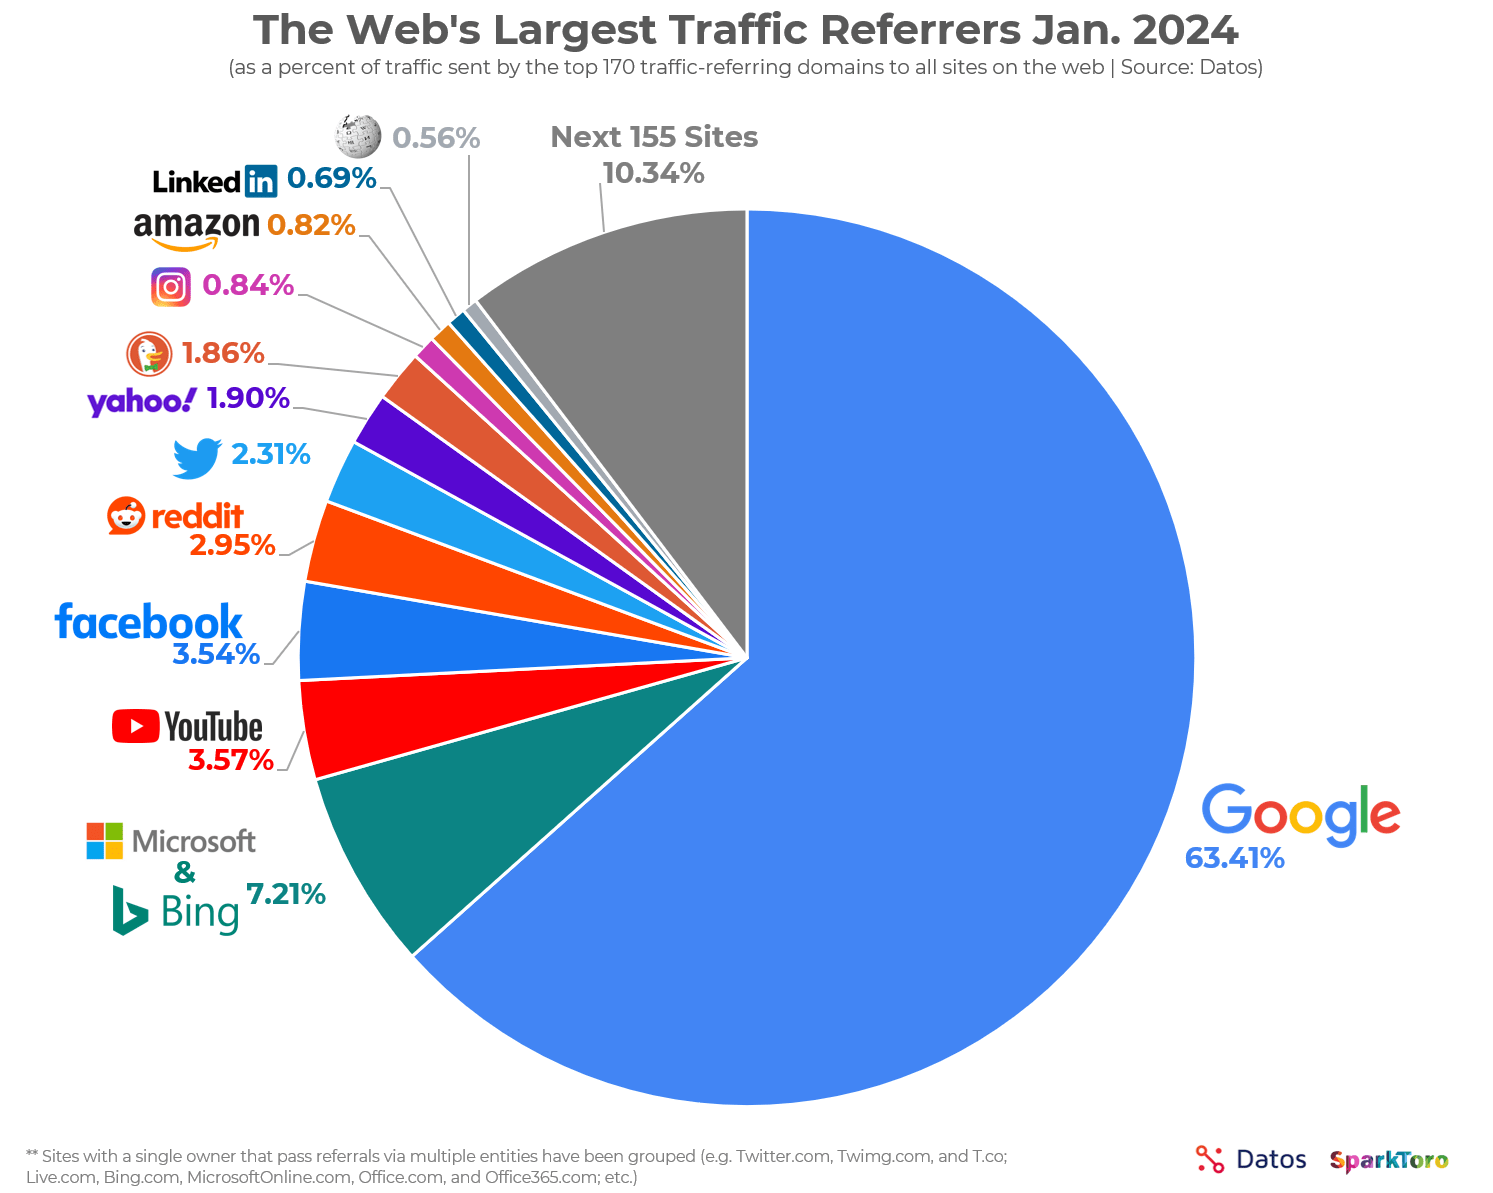 63.41% of all US web traffic referrals come from Google.